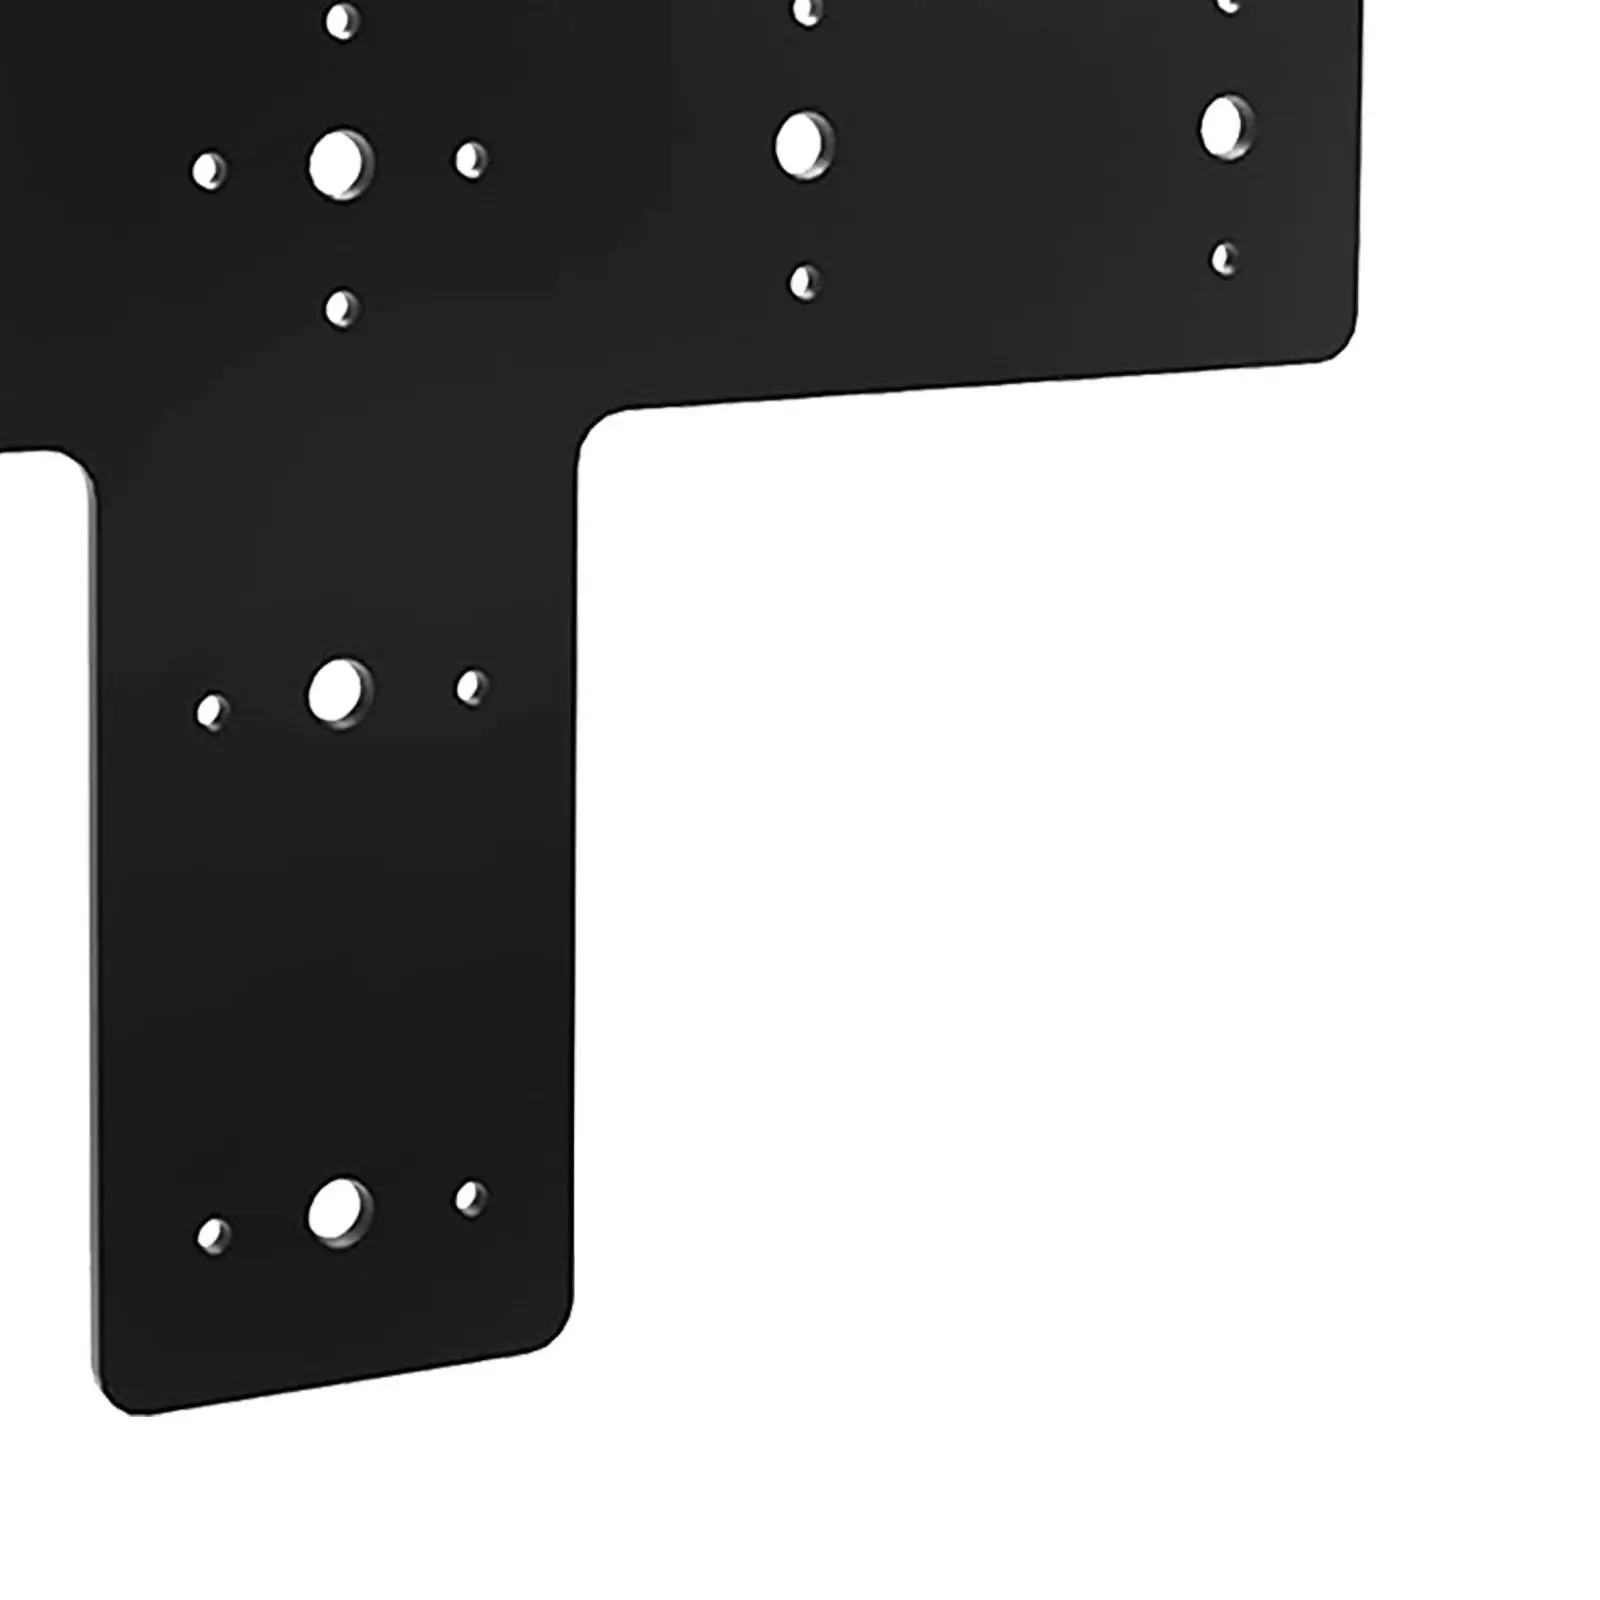 Cross Mending Plate Reinforcement Easy to Install Post to Beam Connector Black for Repair House Framing Pavilion Furniture